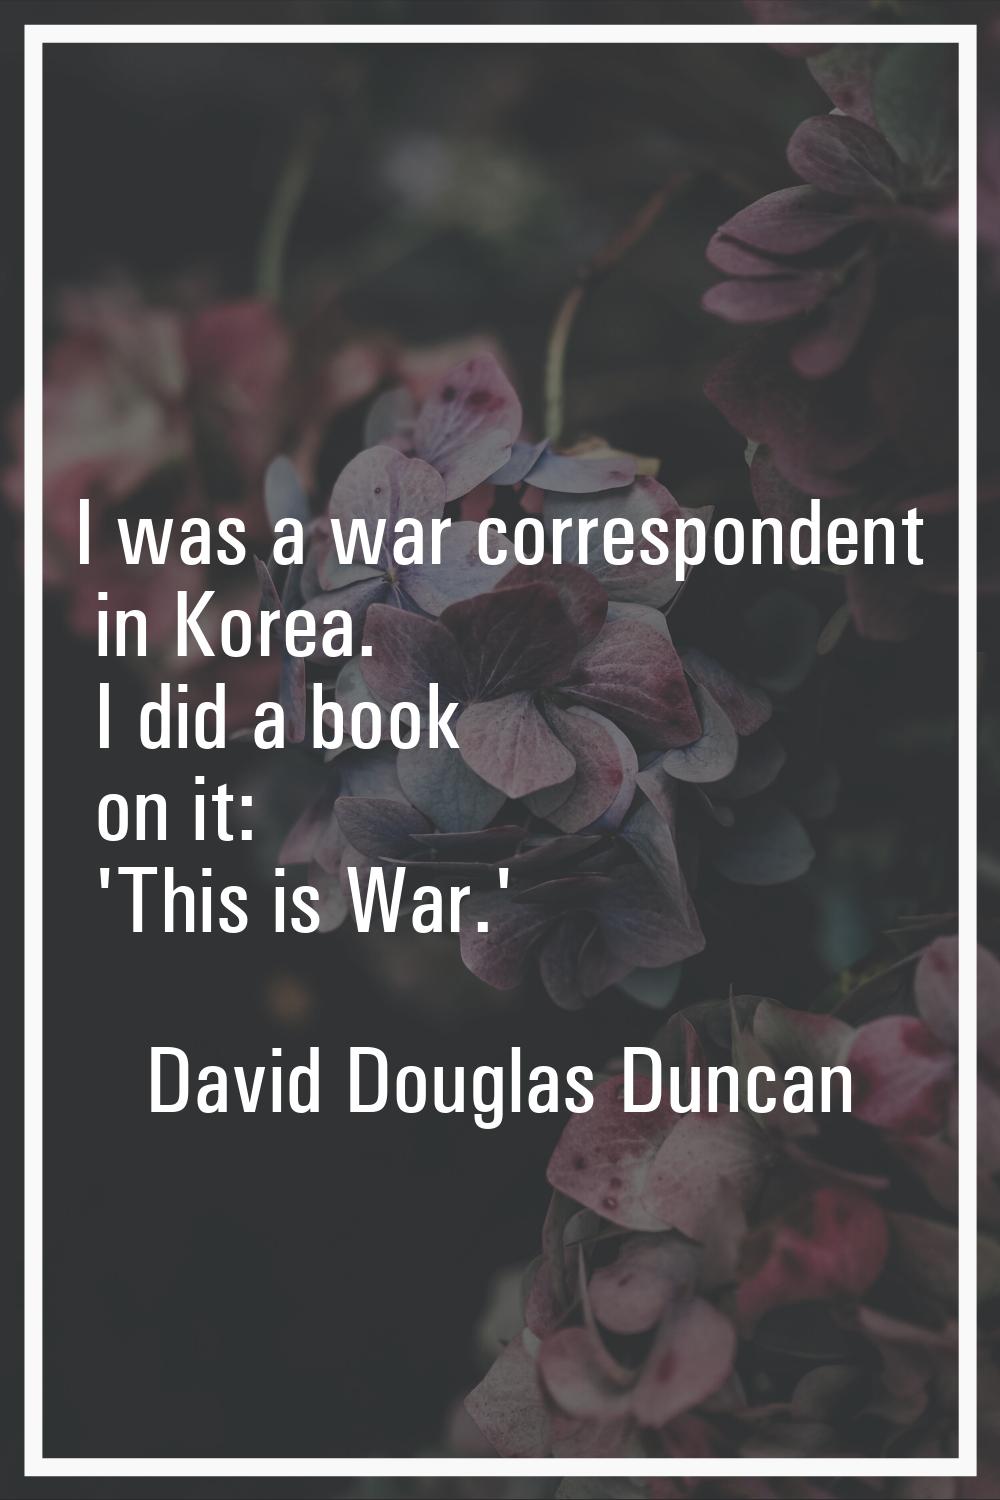 I was a war correspondent in Korea. I did a book on it: 'This is War.'